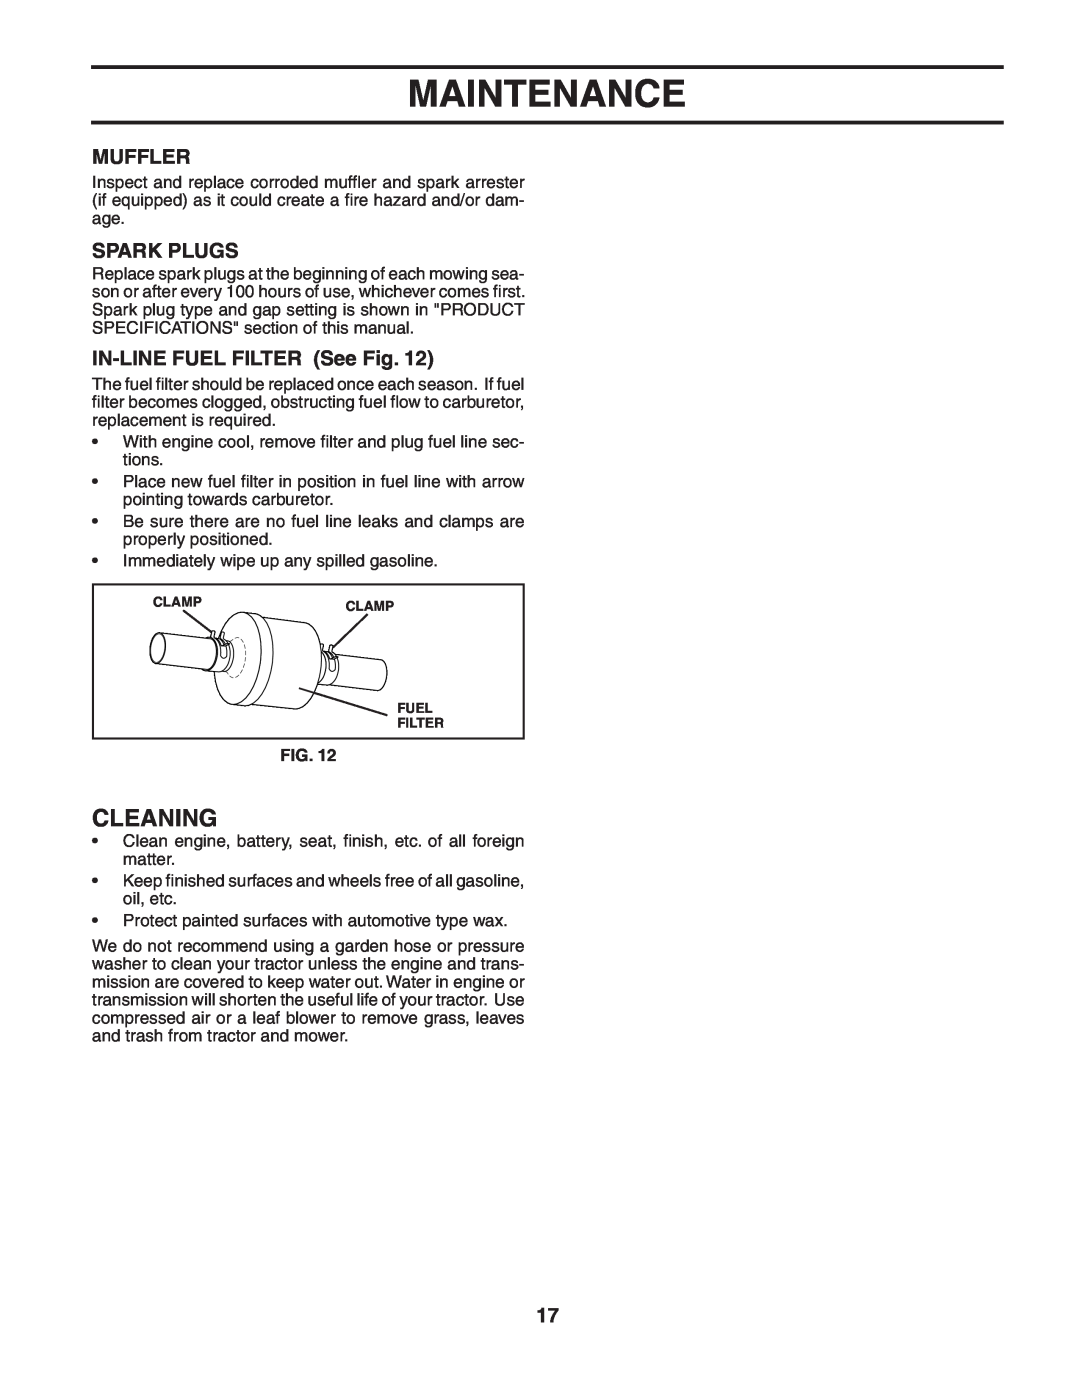 Weed Eater WET2242STB manual Cleaning, Muffler, Spark Plugs, IN-LINEFUEL FILTER See Fig, Maintenance 